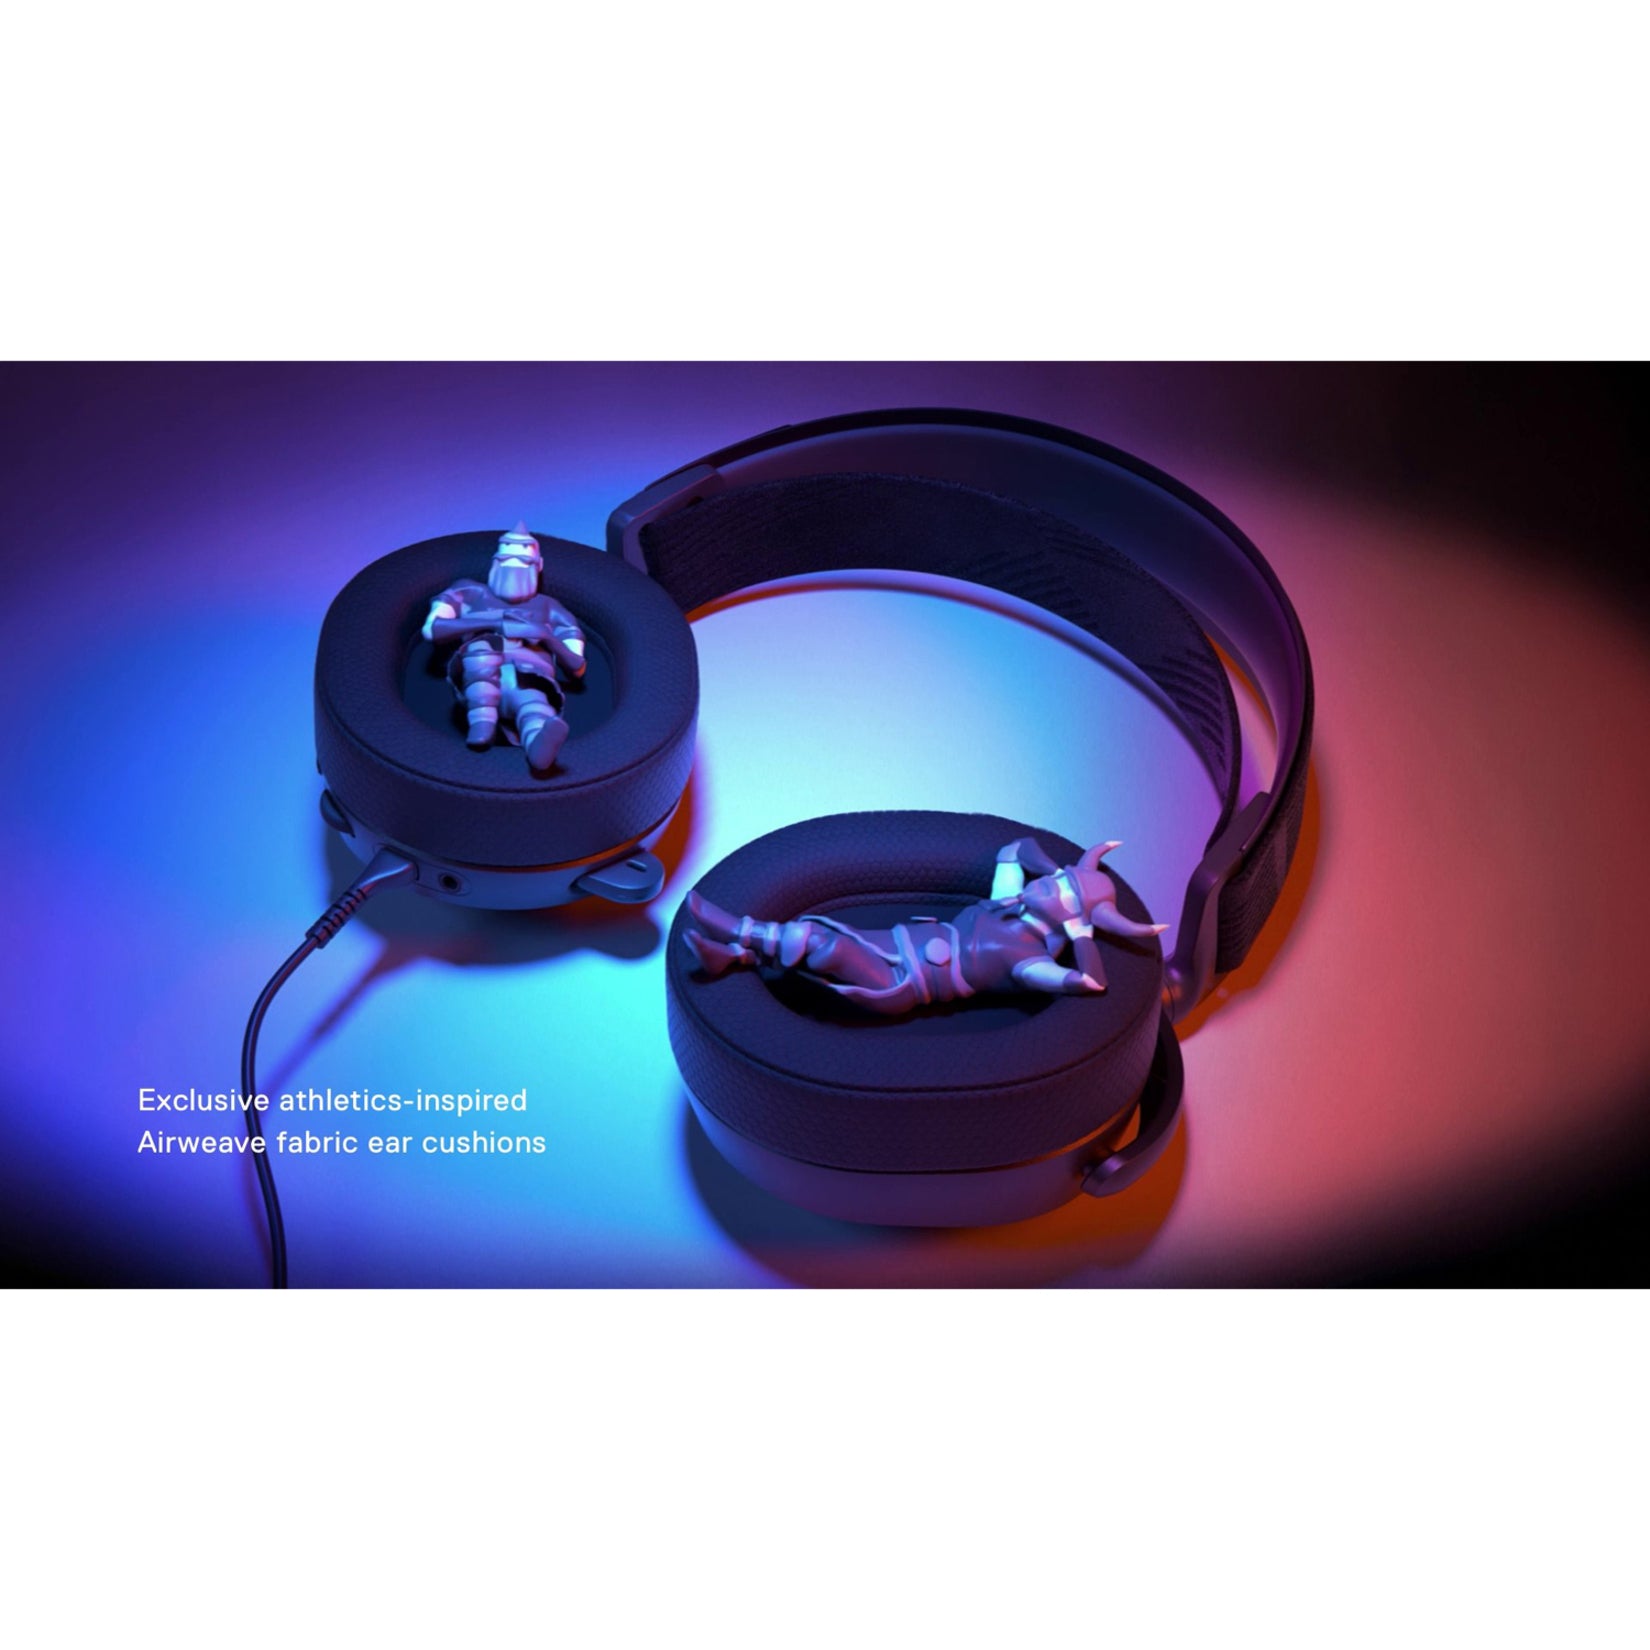 SteelSeries Arctis Pro + Gamedac - Premium Wired Gaming Headset [Discontinued]